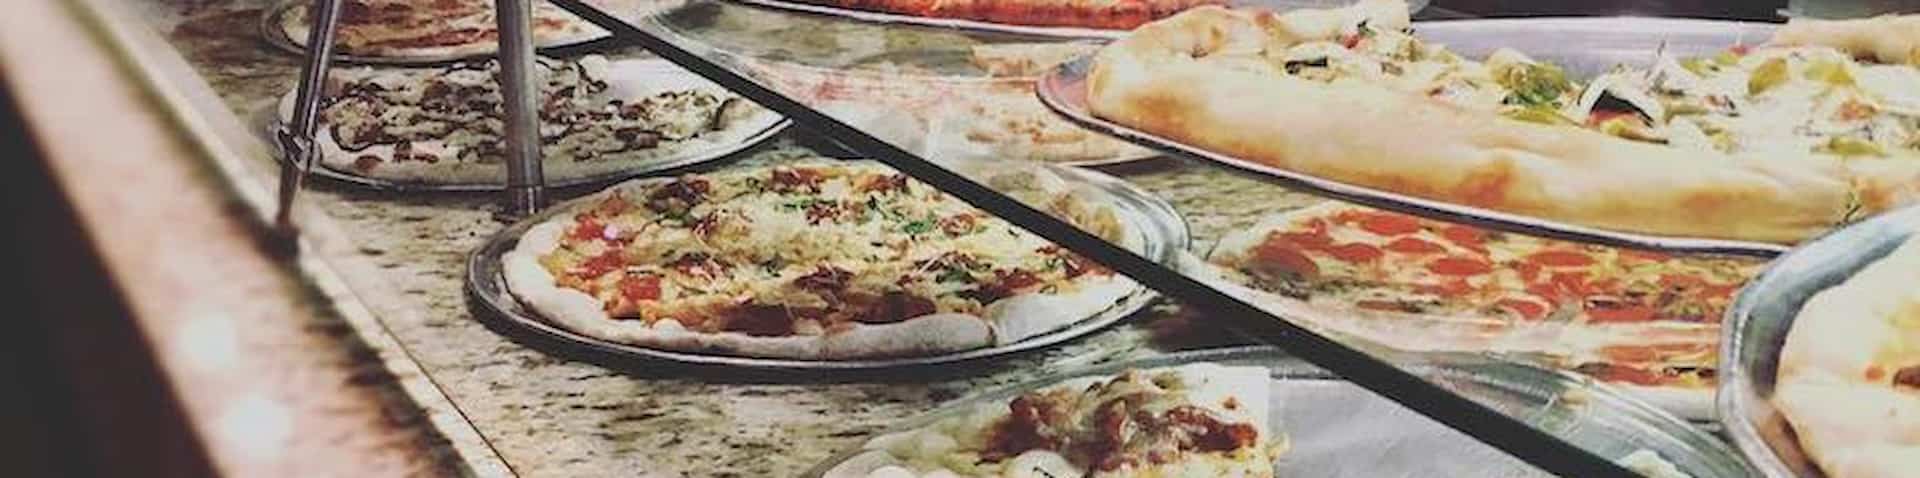 two rows of pizza options close to where customers place order